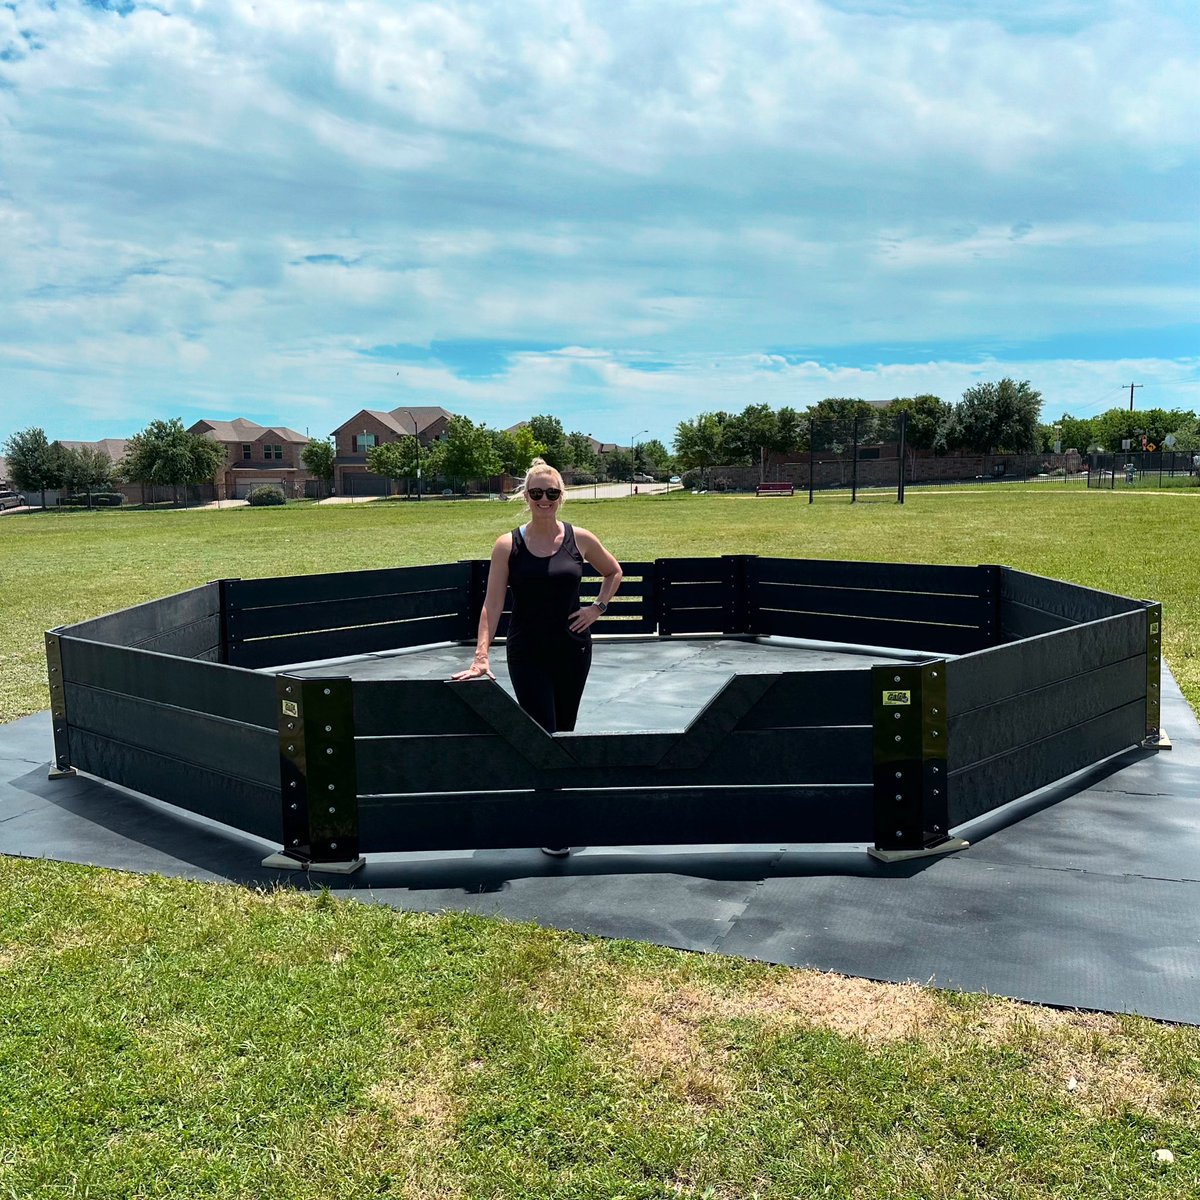 Thank you to our building team that helped me build this Gaga Pit for our students! And thank you to @gagaballpits for this amazing new piece of equipment for PE and recess! #PhysEd